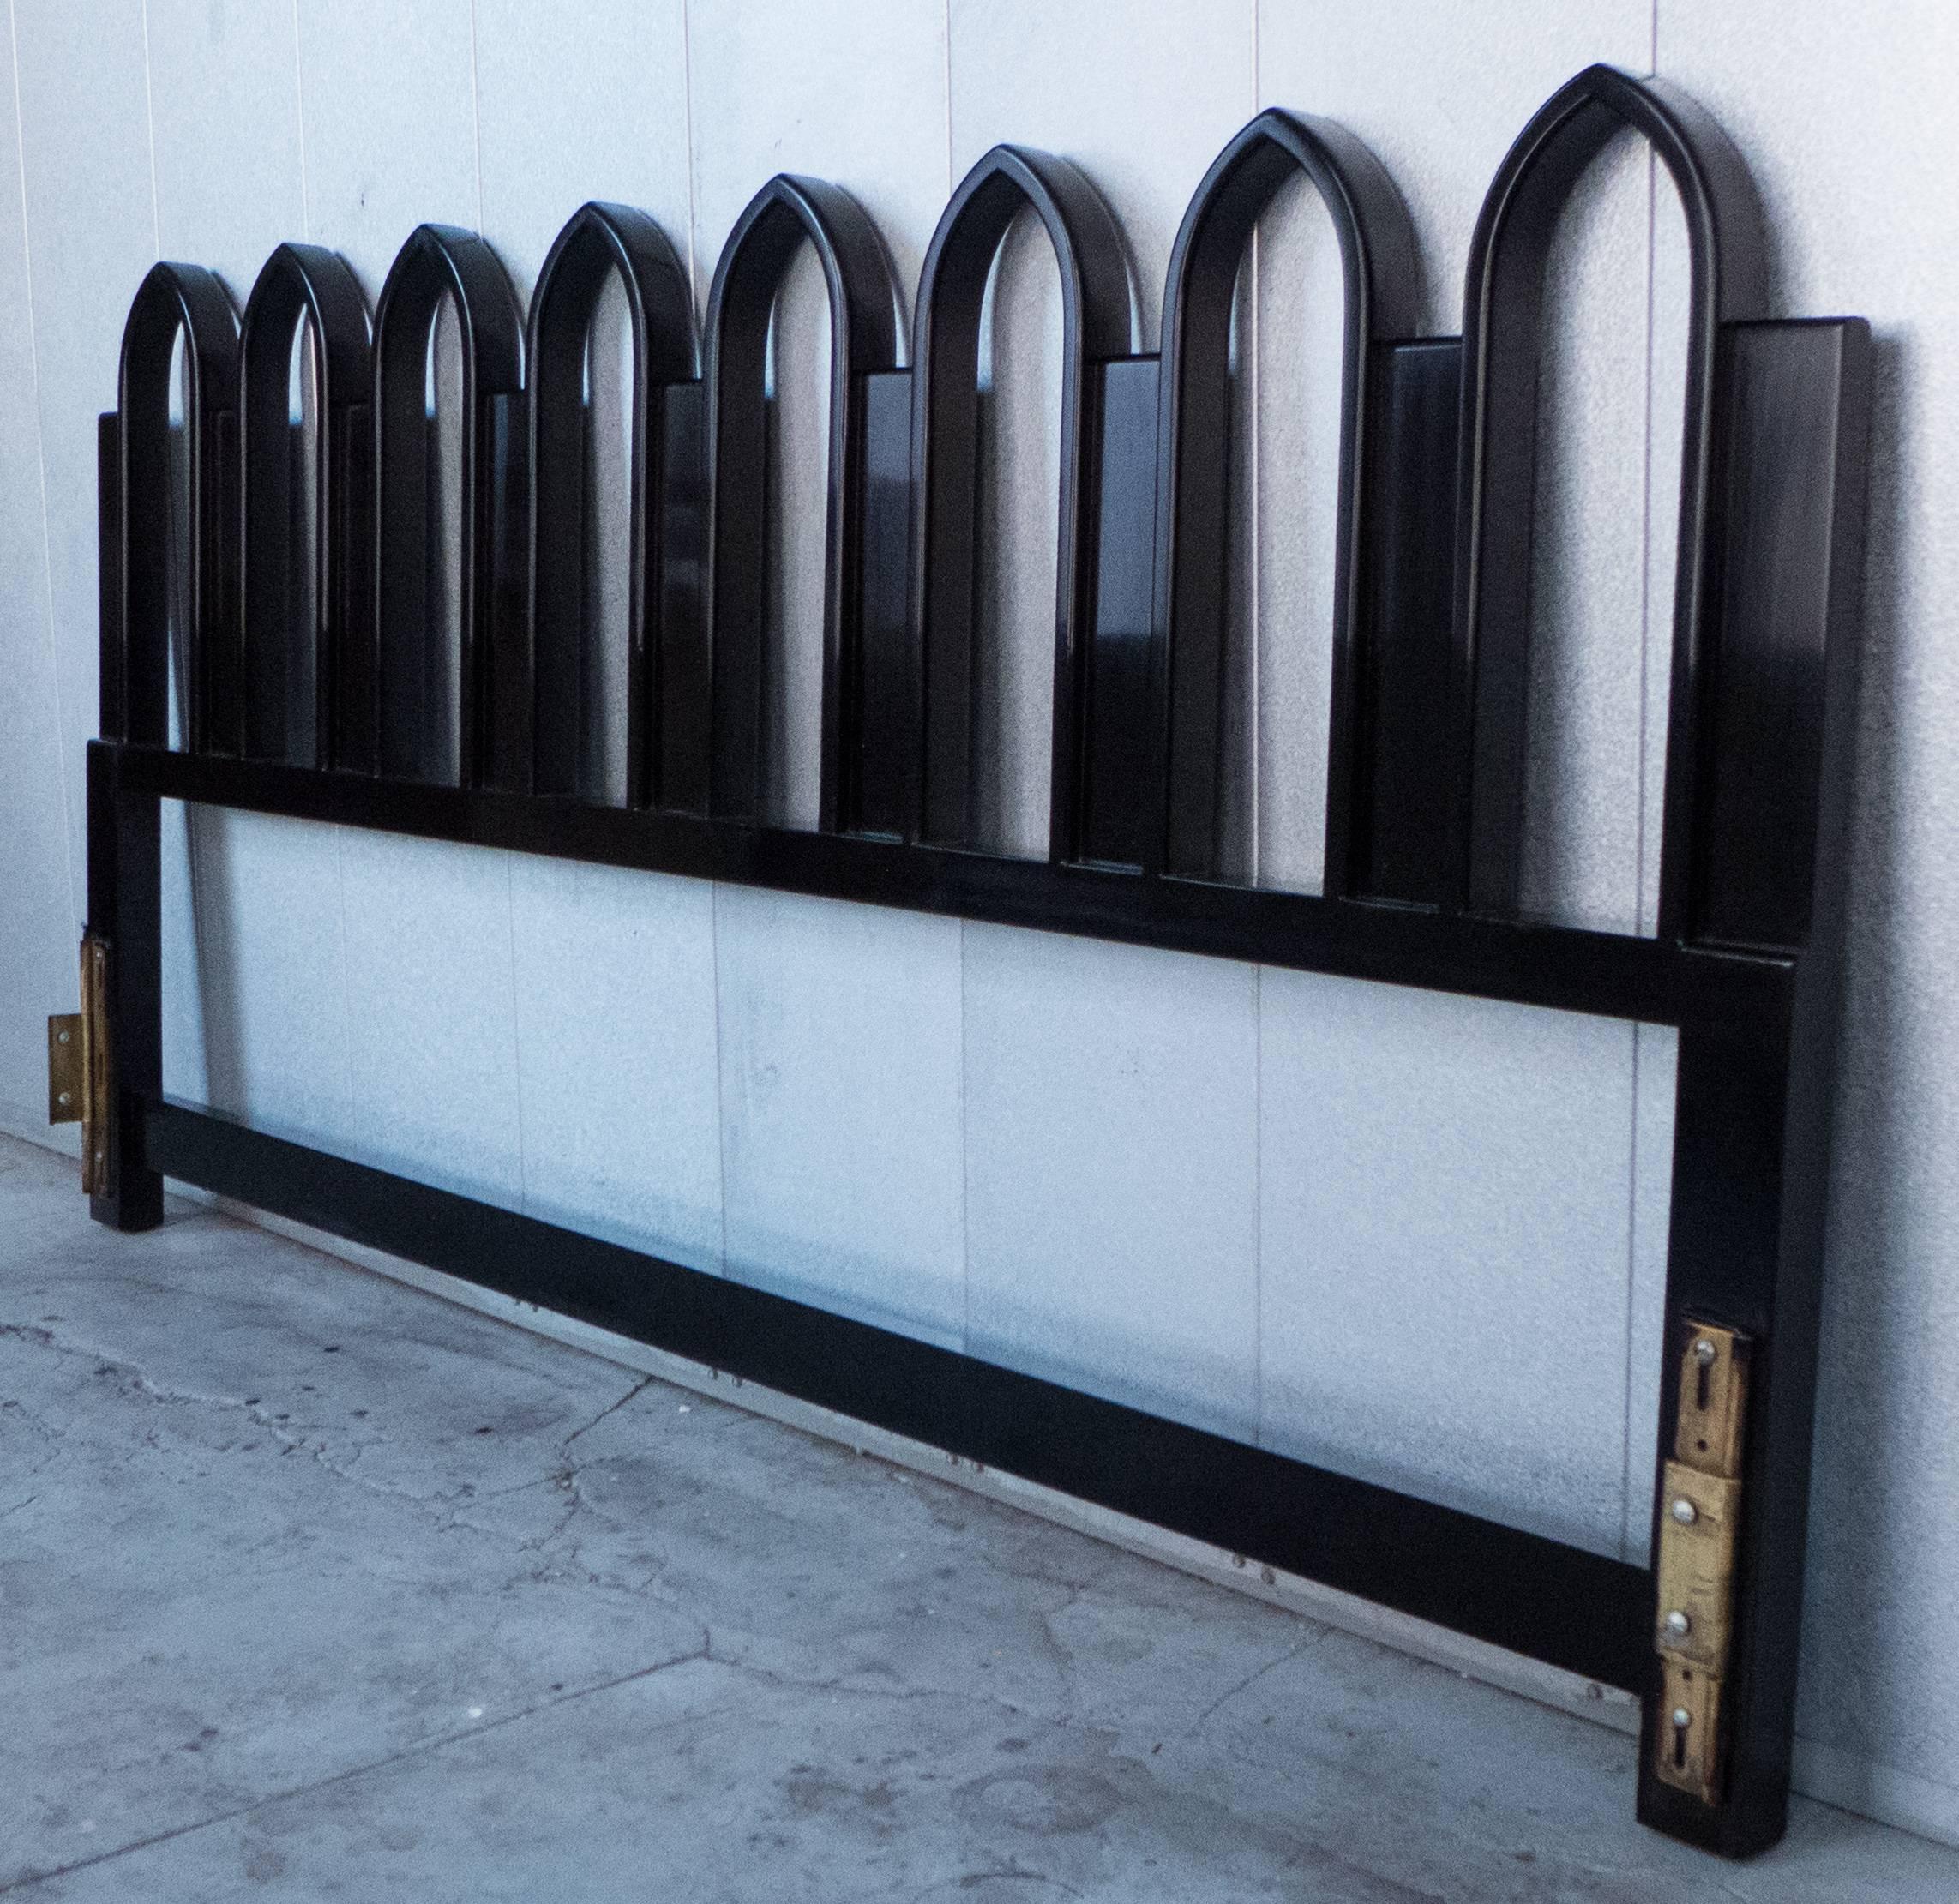 King-size headboard in dark mahogany with a row of Gothic arches. Designed and produced by Harvey Probber. With the original brass fittings for a universal frame, and a copy of the original receipt from Probber dated 1962. The measurement from the